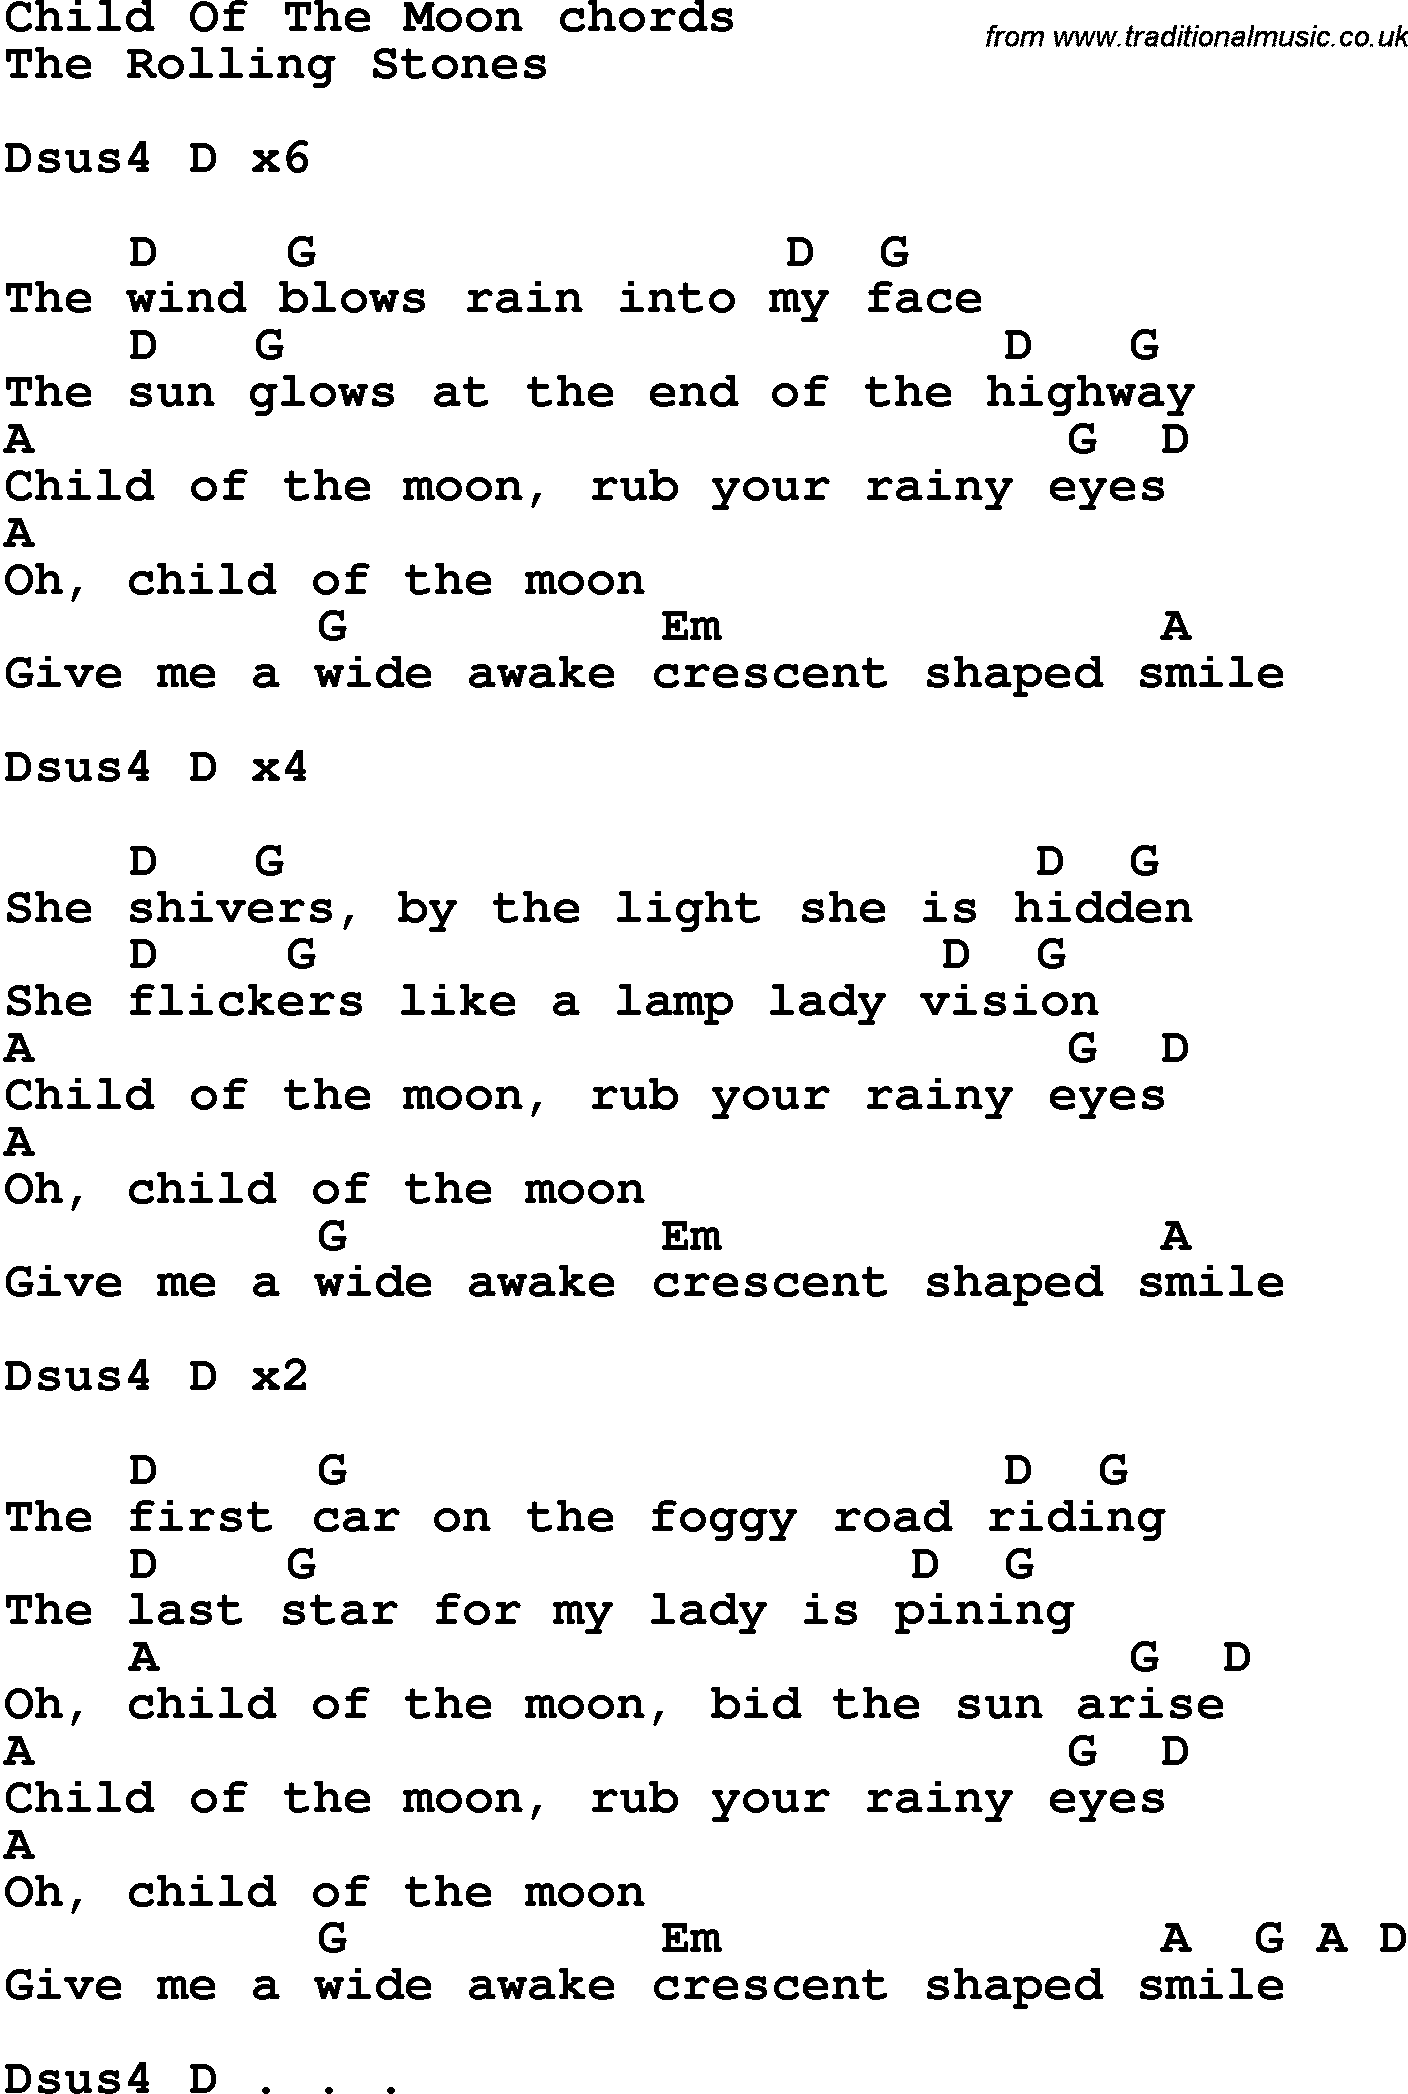 Song Lyrics with guitar chords for Child Of The Moon